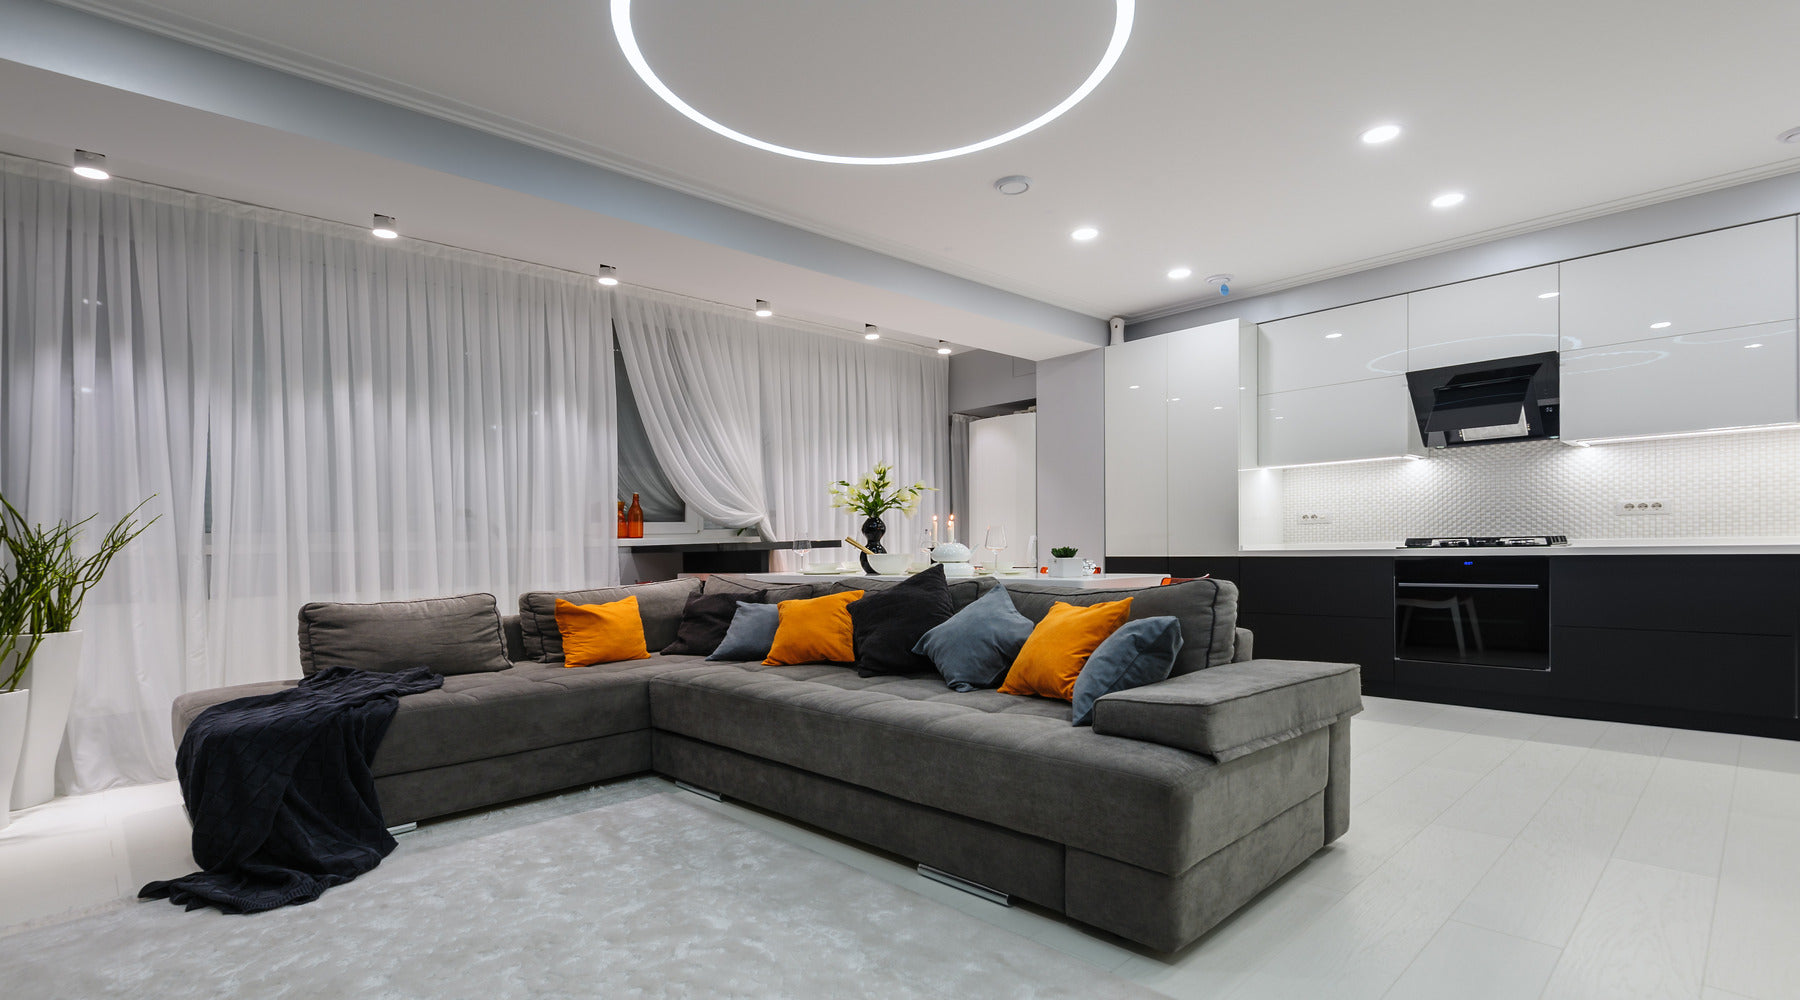 Modern white kitchen and living room shown with LED lights